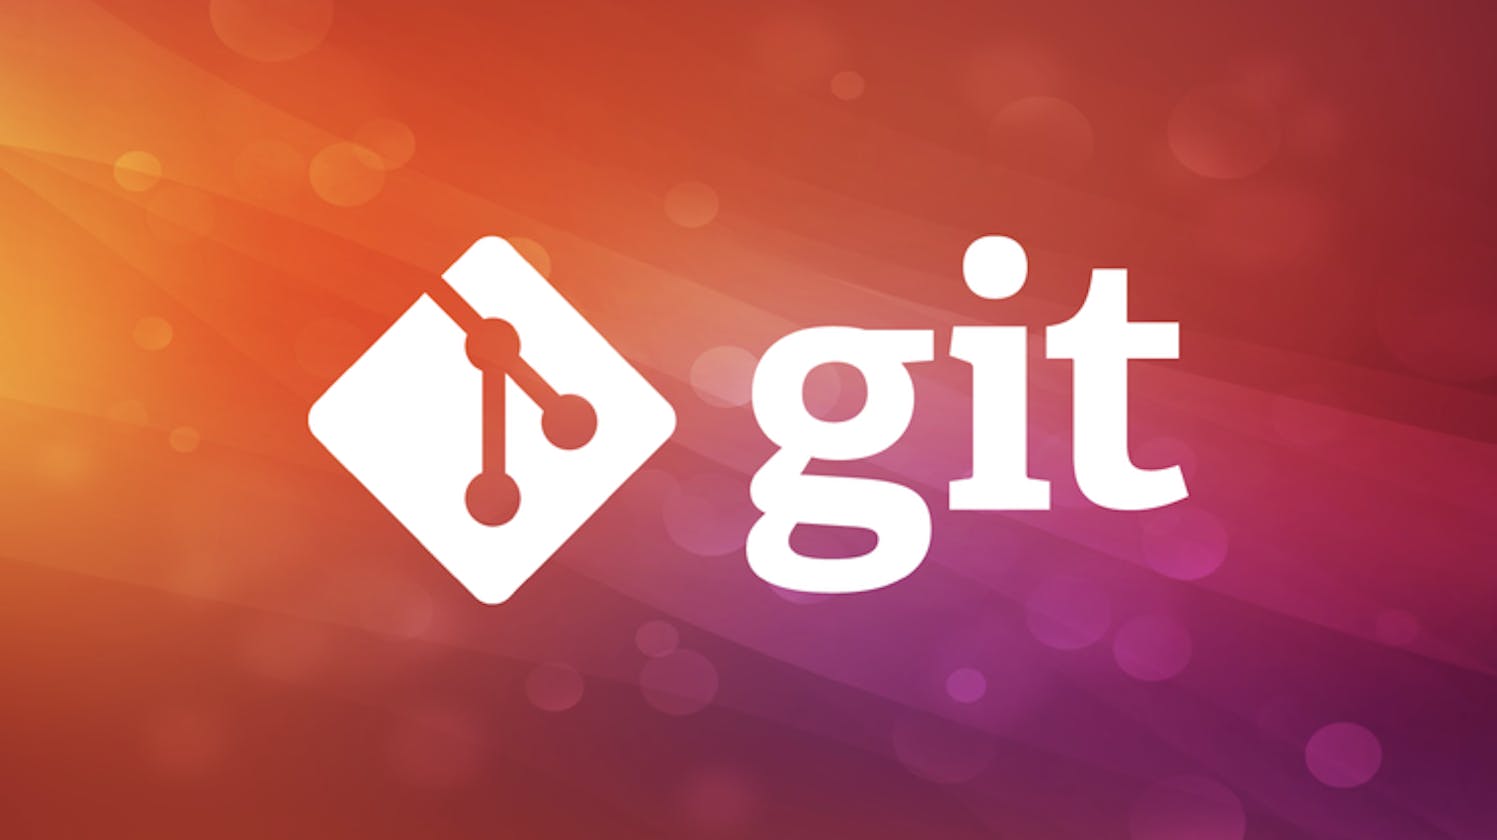 Git and git commands